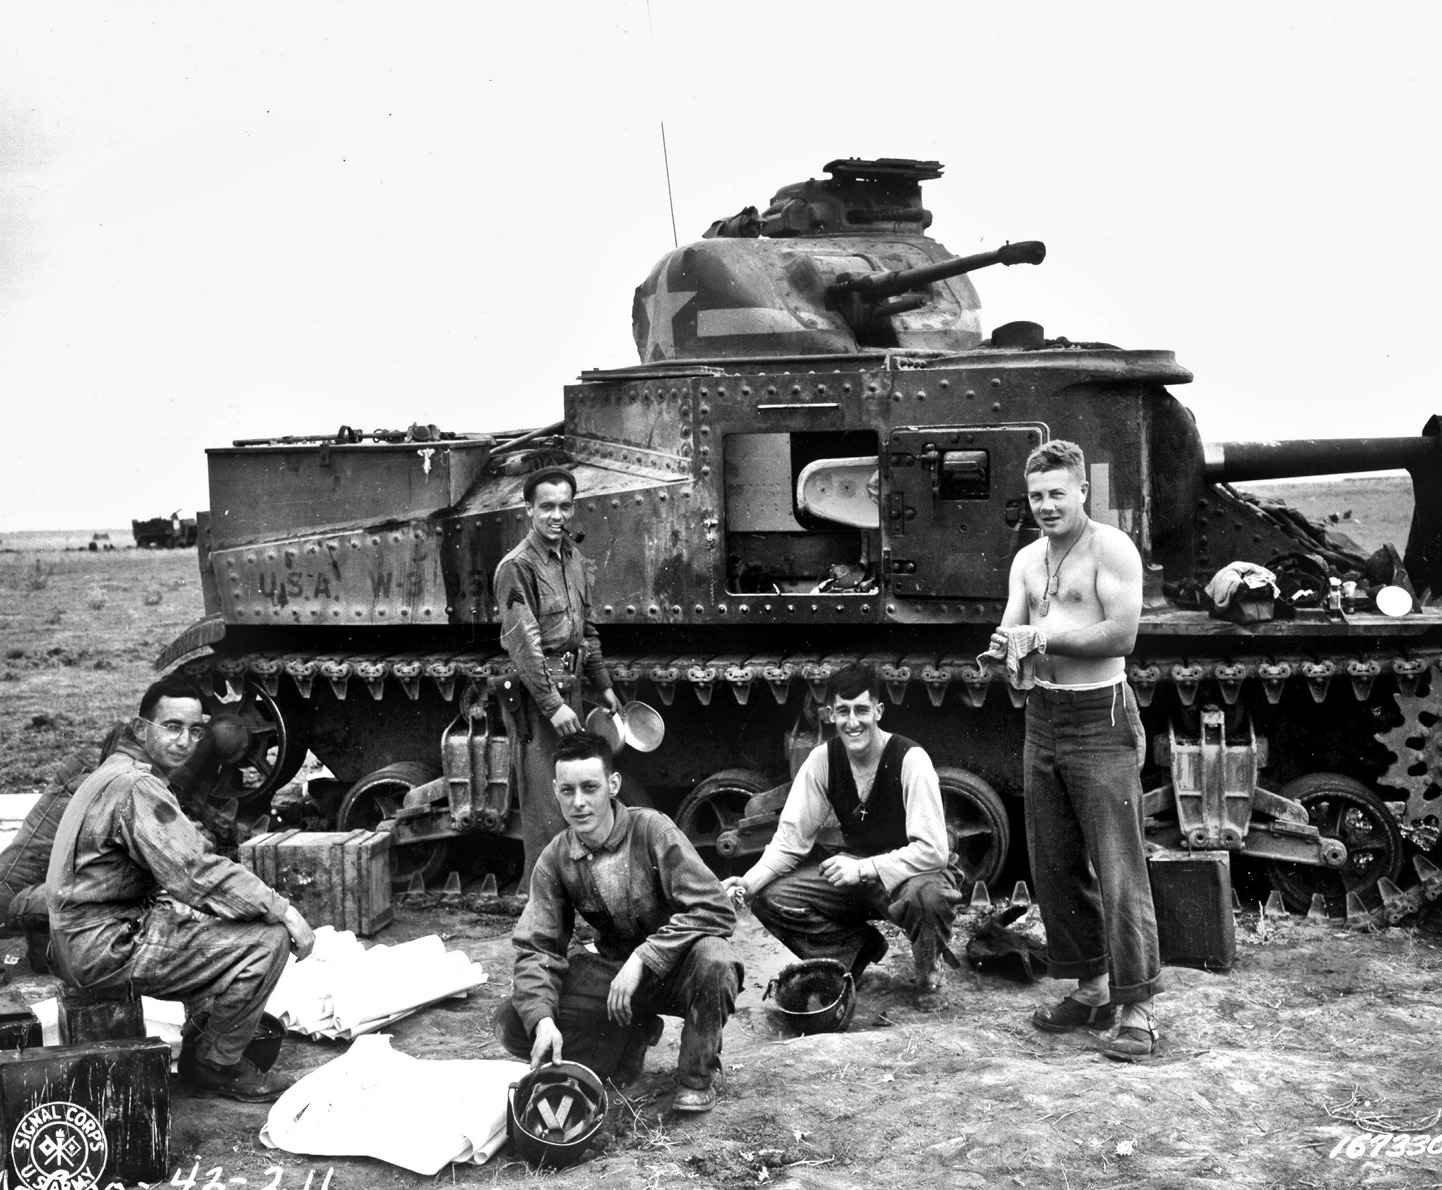 The crew of an M3 Lee medium tank, part of Major General Orlando Ward’s 1st Armored Division, takes a break from combat. Patton worried that Ward’s men were too timid, anathema to a tank commander.